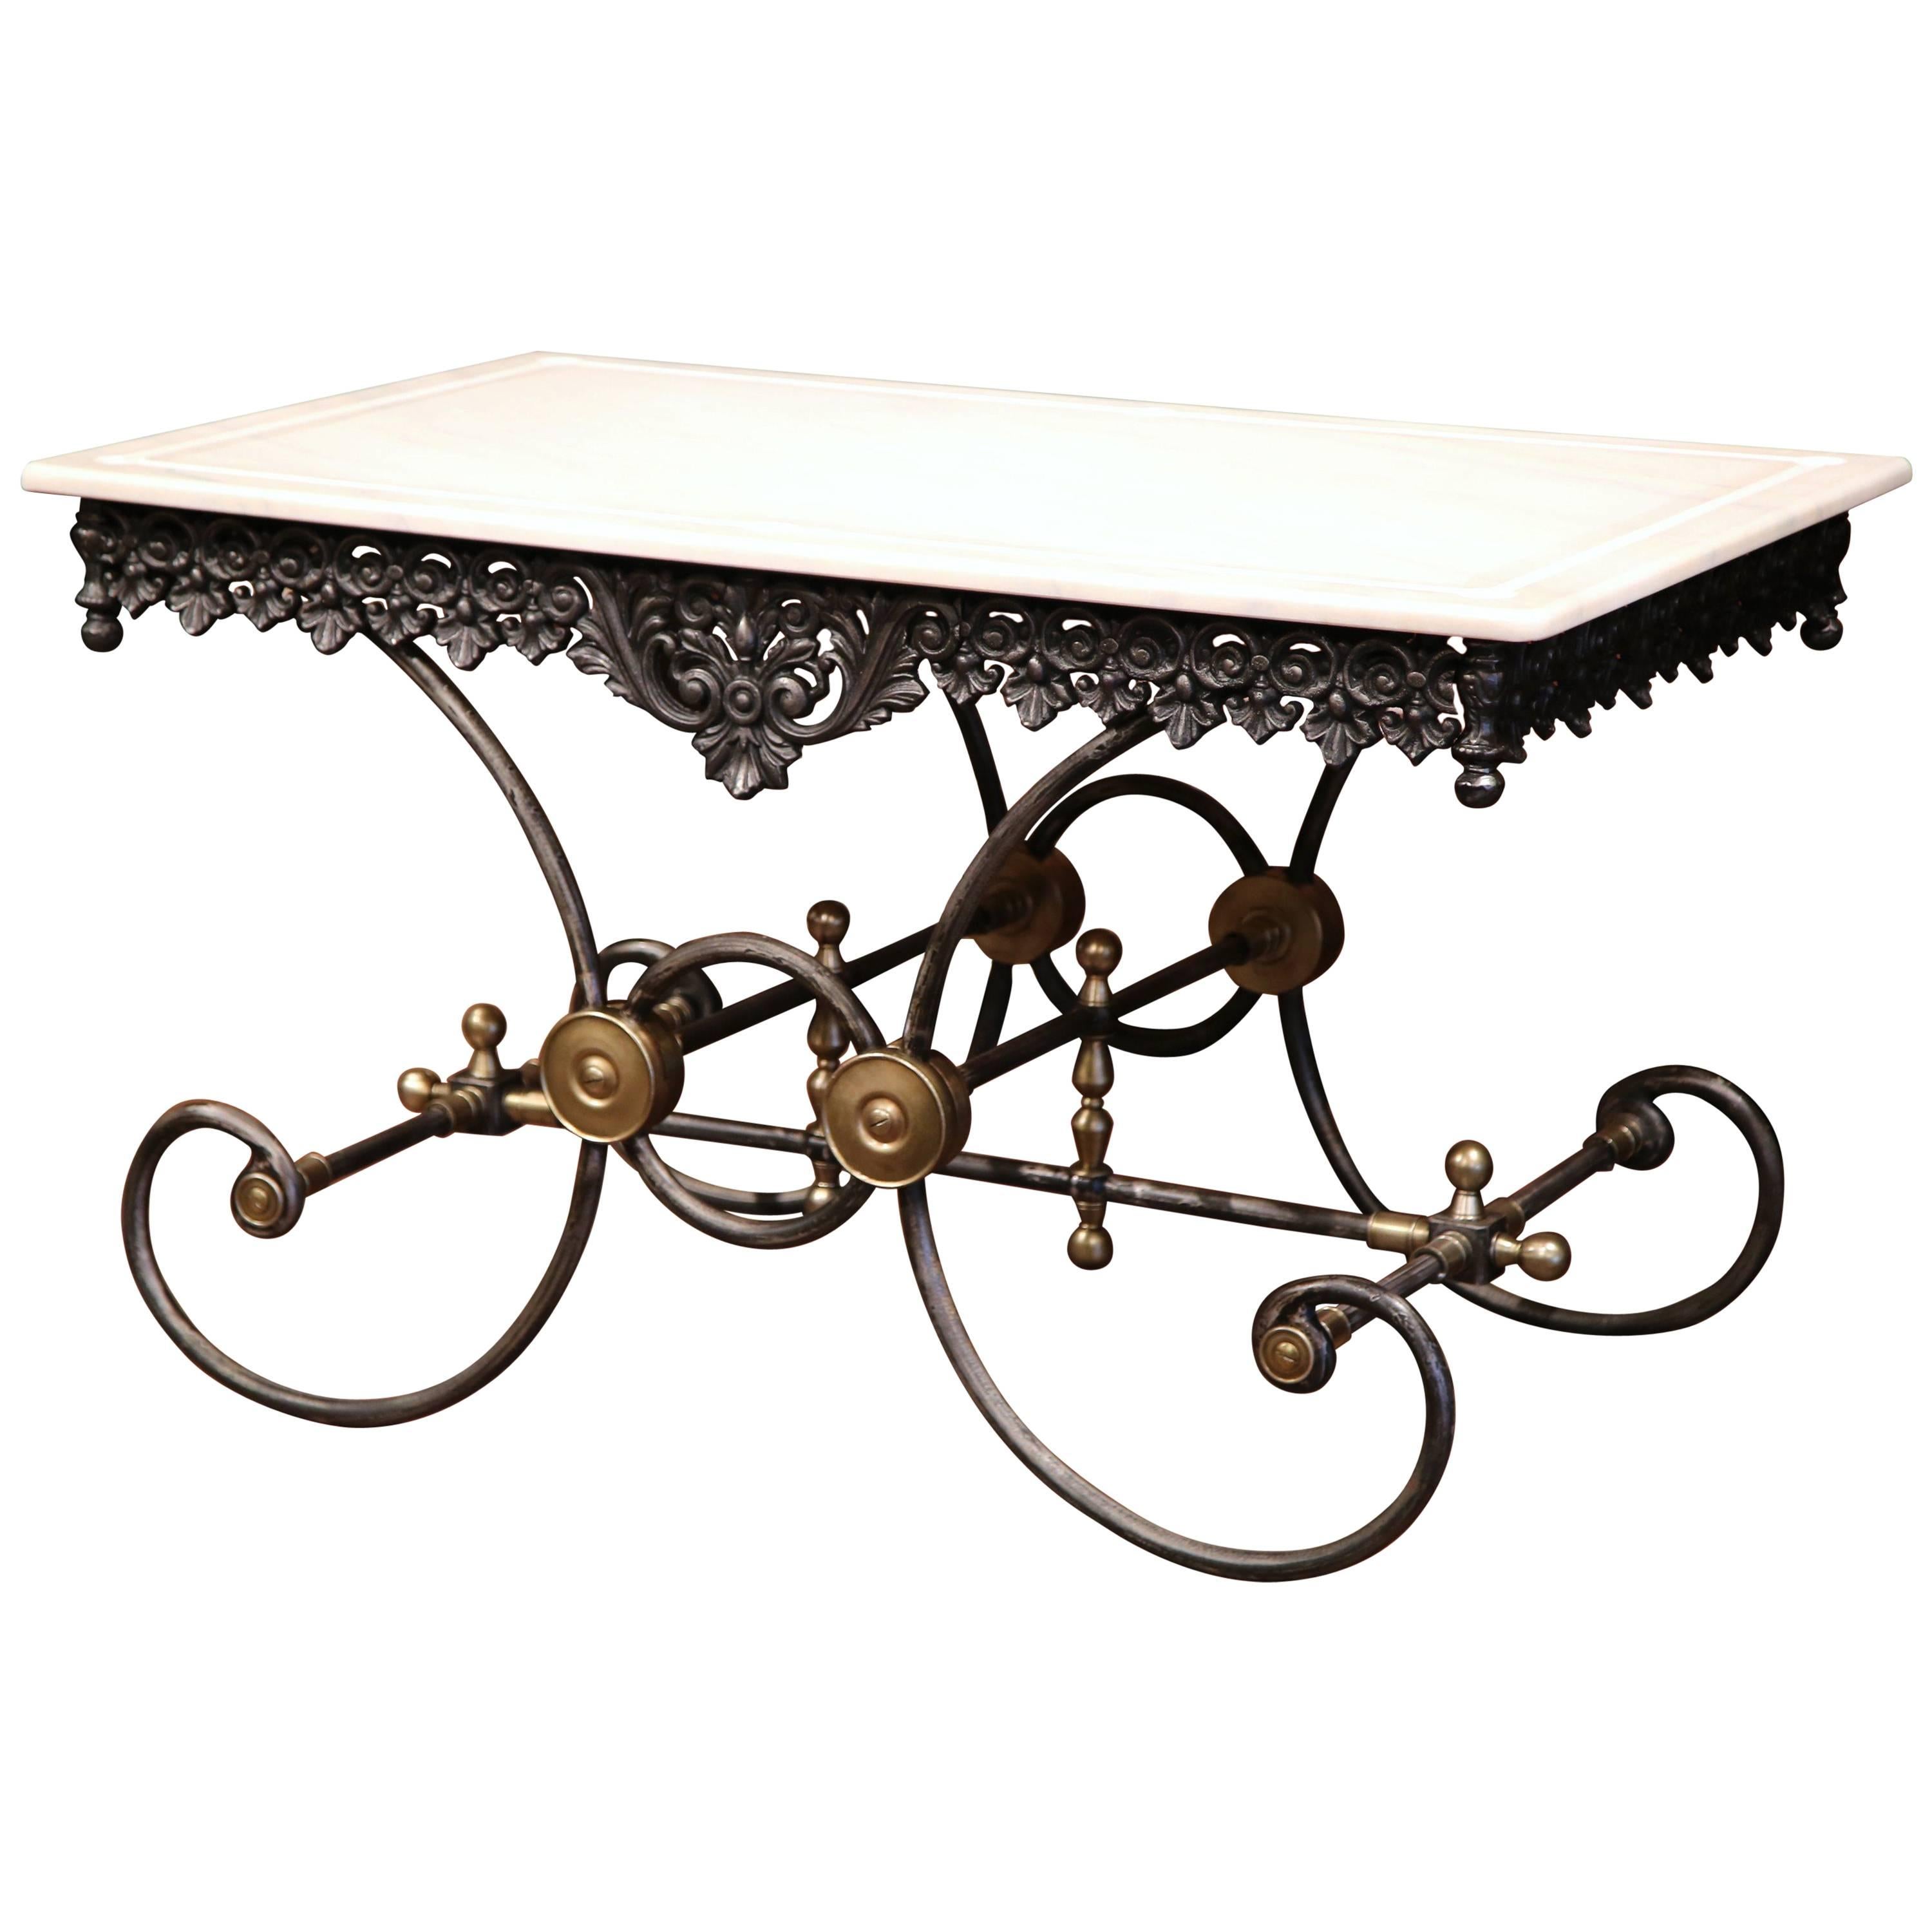 Polished Iron Butcher Pastry Table with Marble Top and Brass Mounts from France